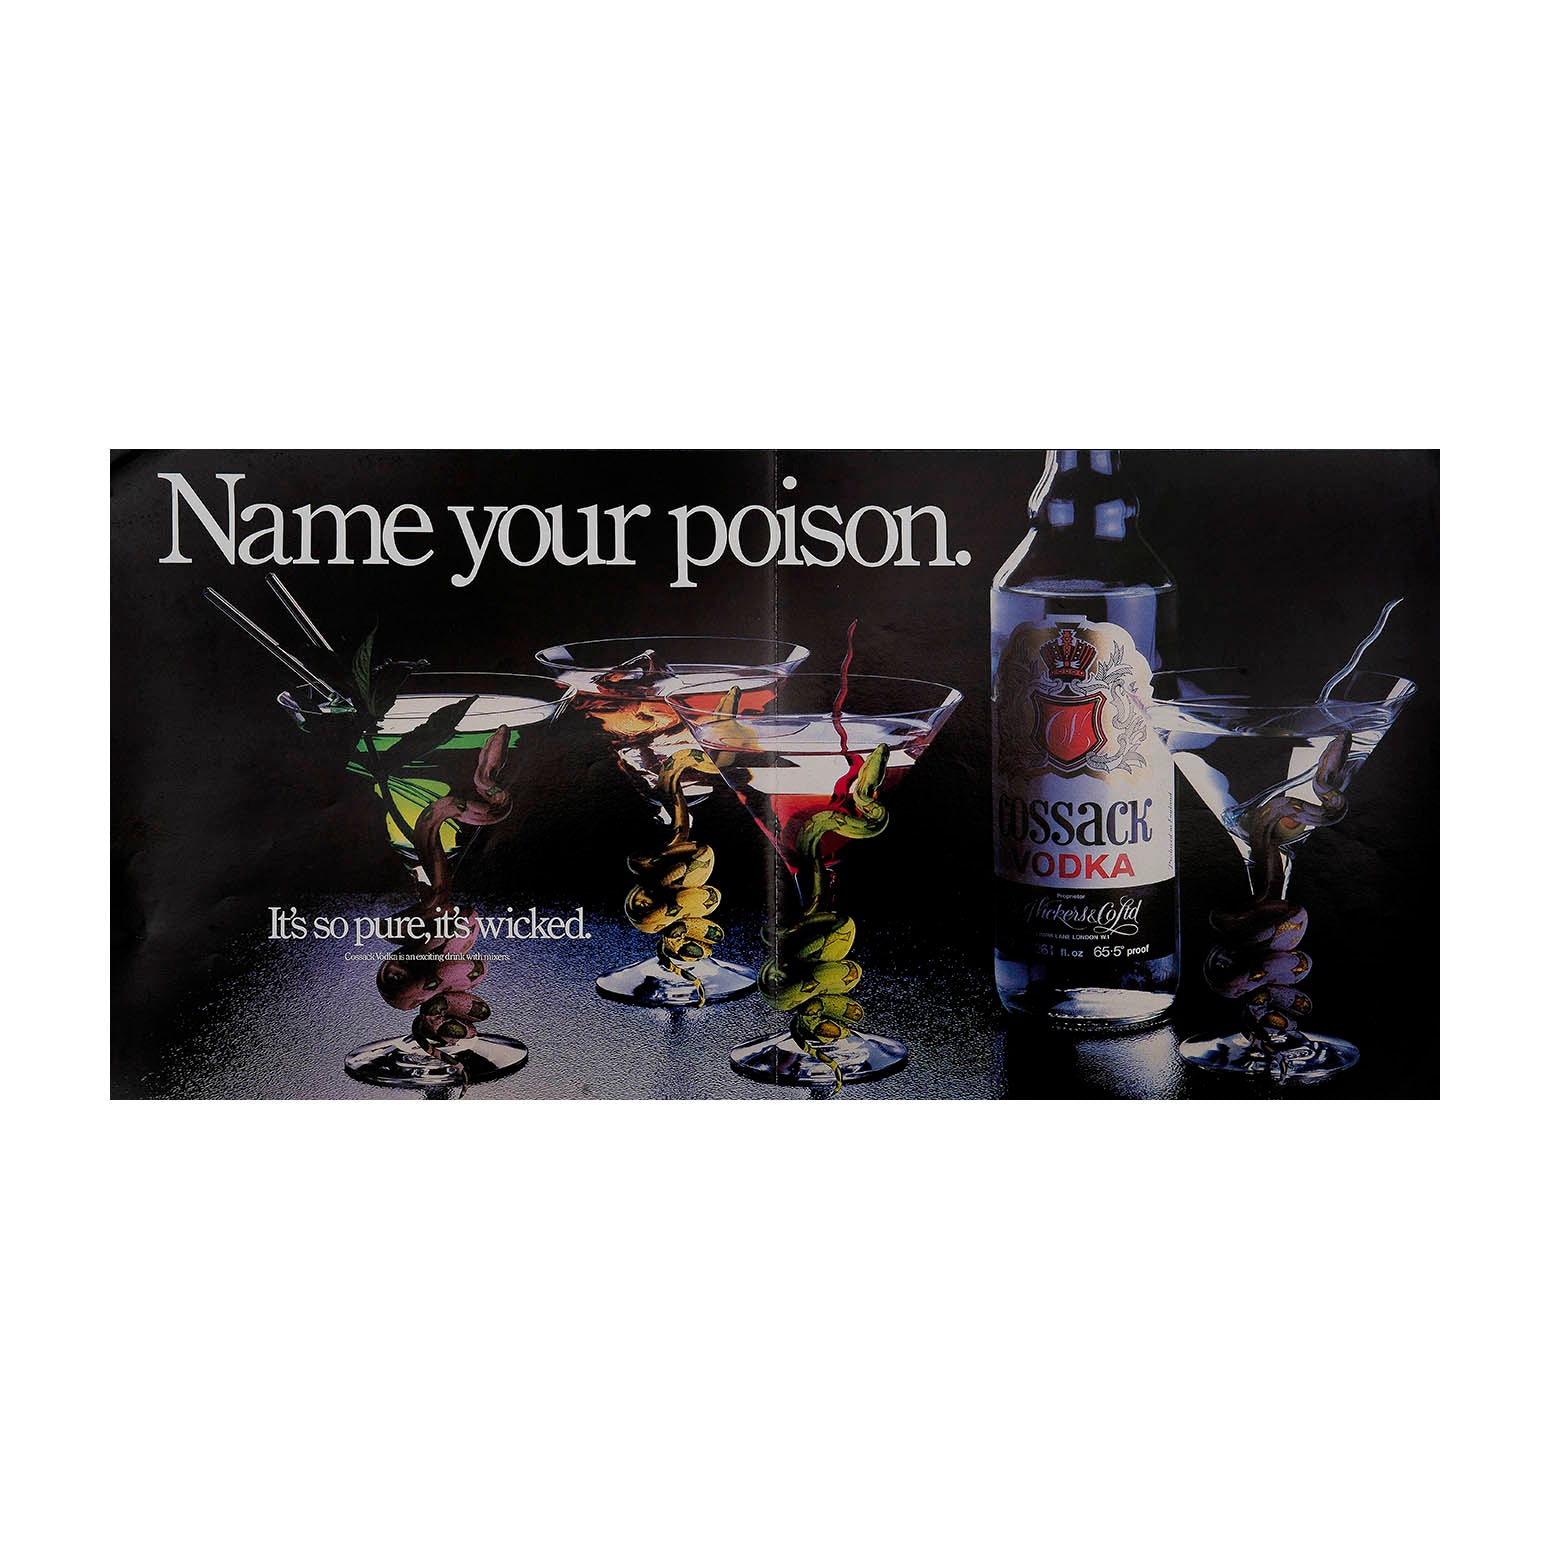 Cossack Vodka. Name your poison (panel poster)